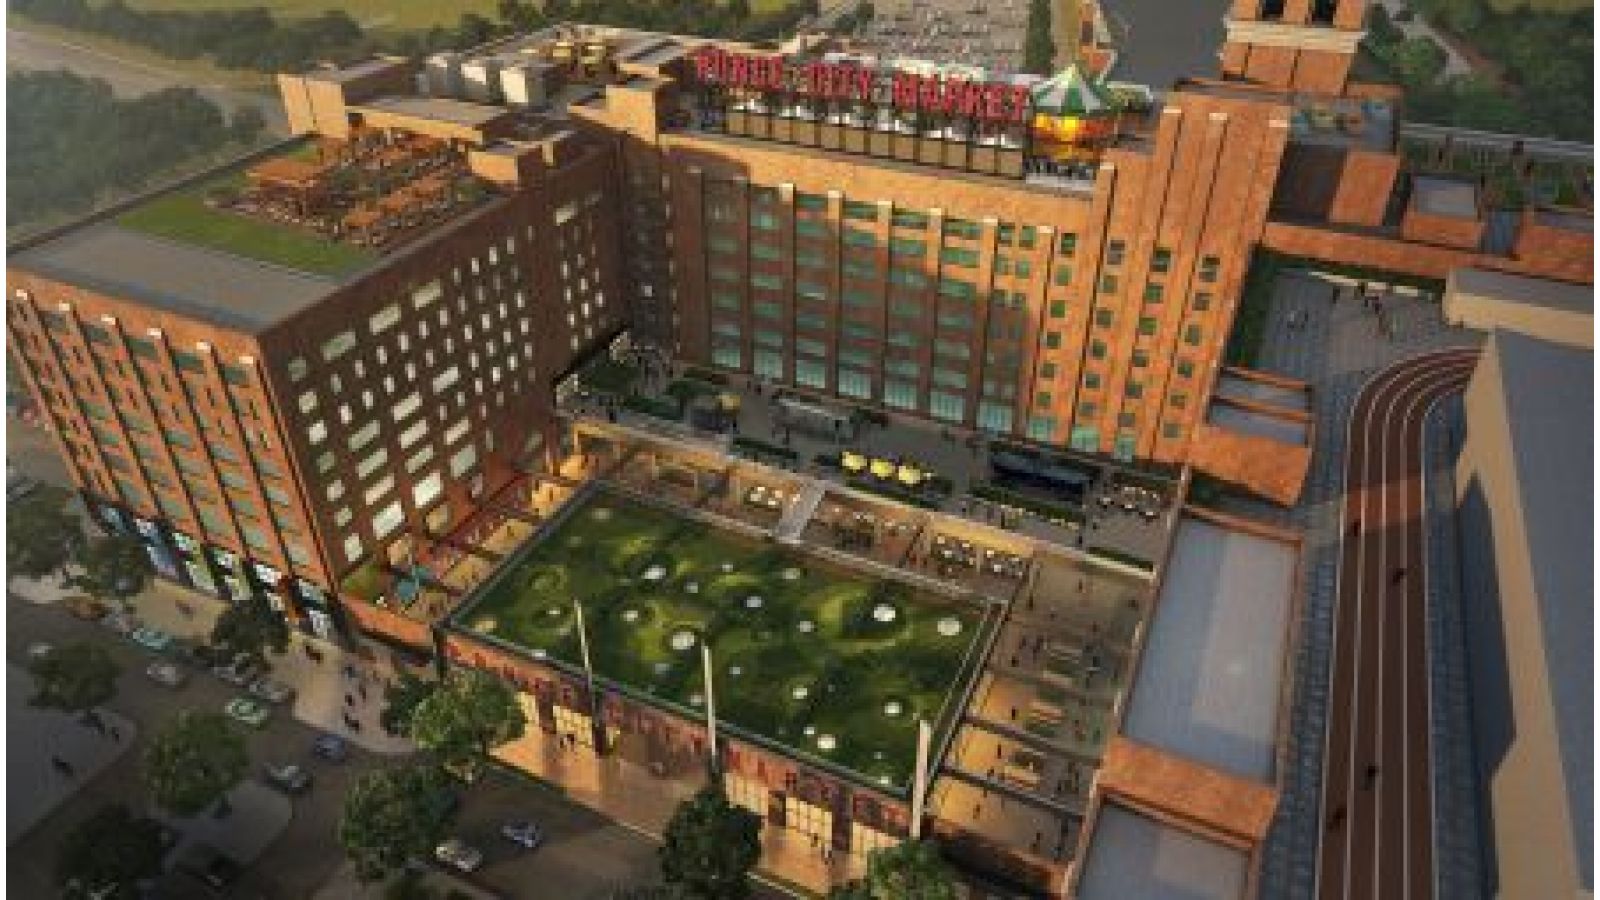 Architecture Firm Stevens & Wilkinson Completes Adaptive Reuse of the FLATS at Ponce City Market